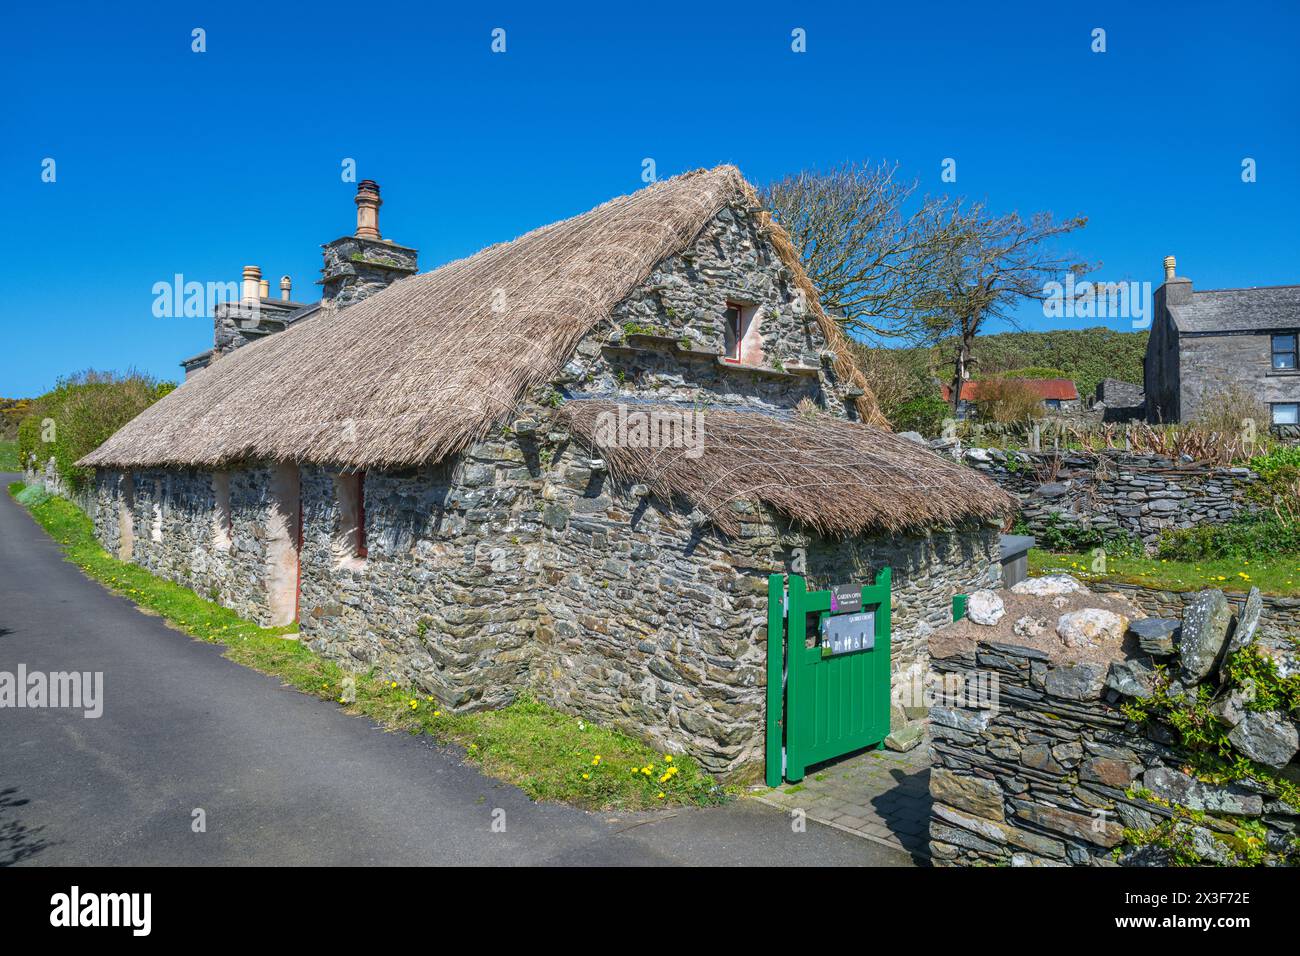 Quirks Croft, a thatched cottage in the historic village of Craigneash, Isle of Man, England, UK Stock Photo